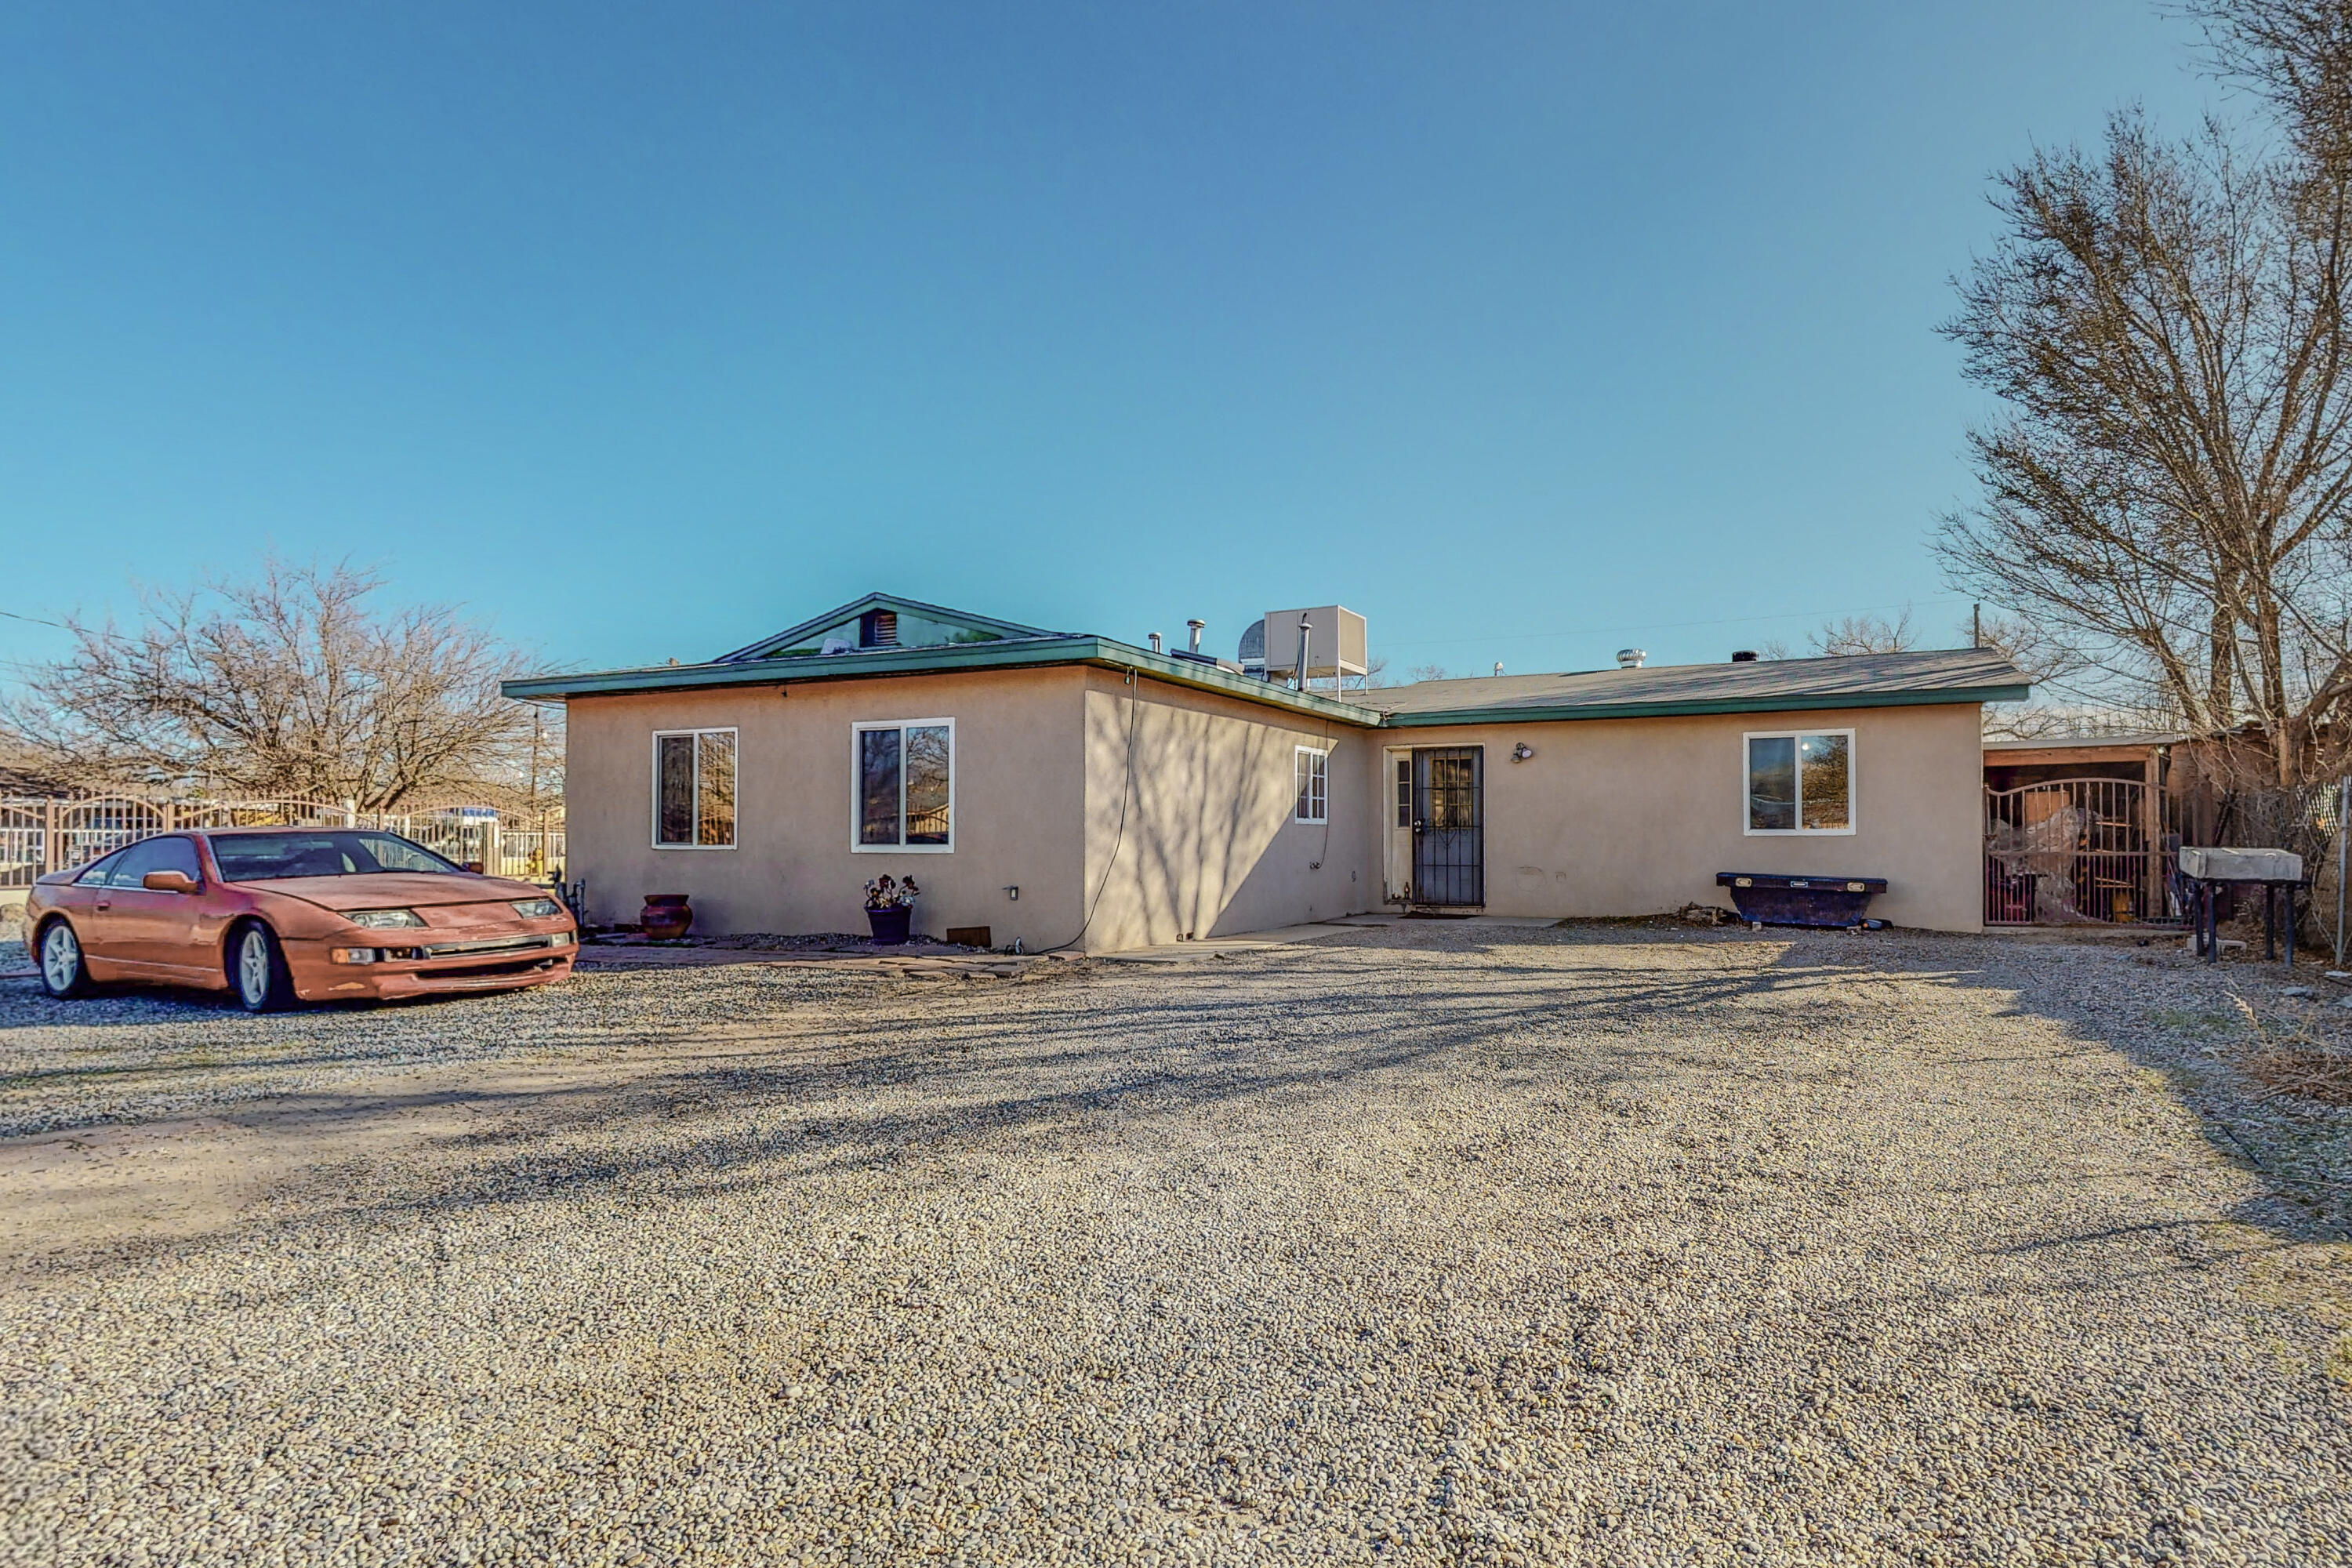 Check out this cozy home on a large lot with lots of storage space. Don't miss out on the large Workshop and additional storage. Home has a lot of potential. Some upgrades within the past few years include upgraded bathroom, kitchen, laundry room and roof.